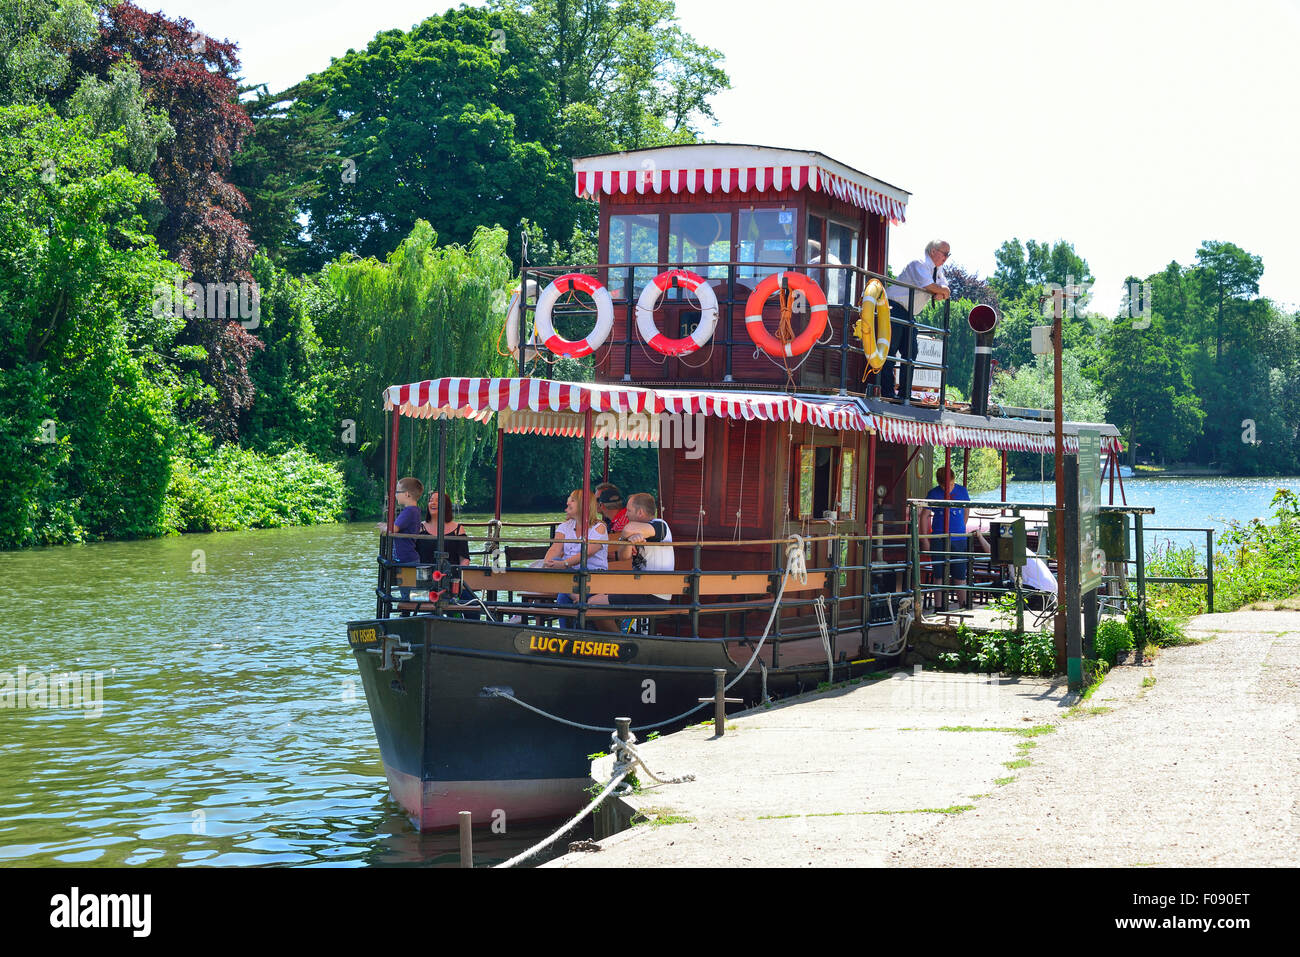 French Brothers 'Lucy Fisher' paddle steamer on River Thames, Runnymede, Surrey, England, United Kingdom Stock Photo